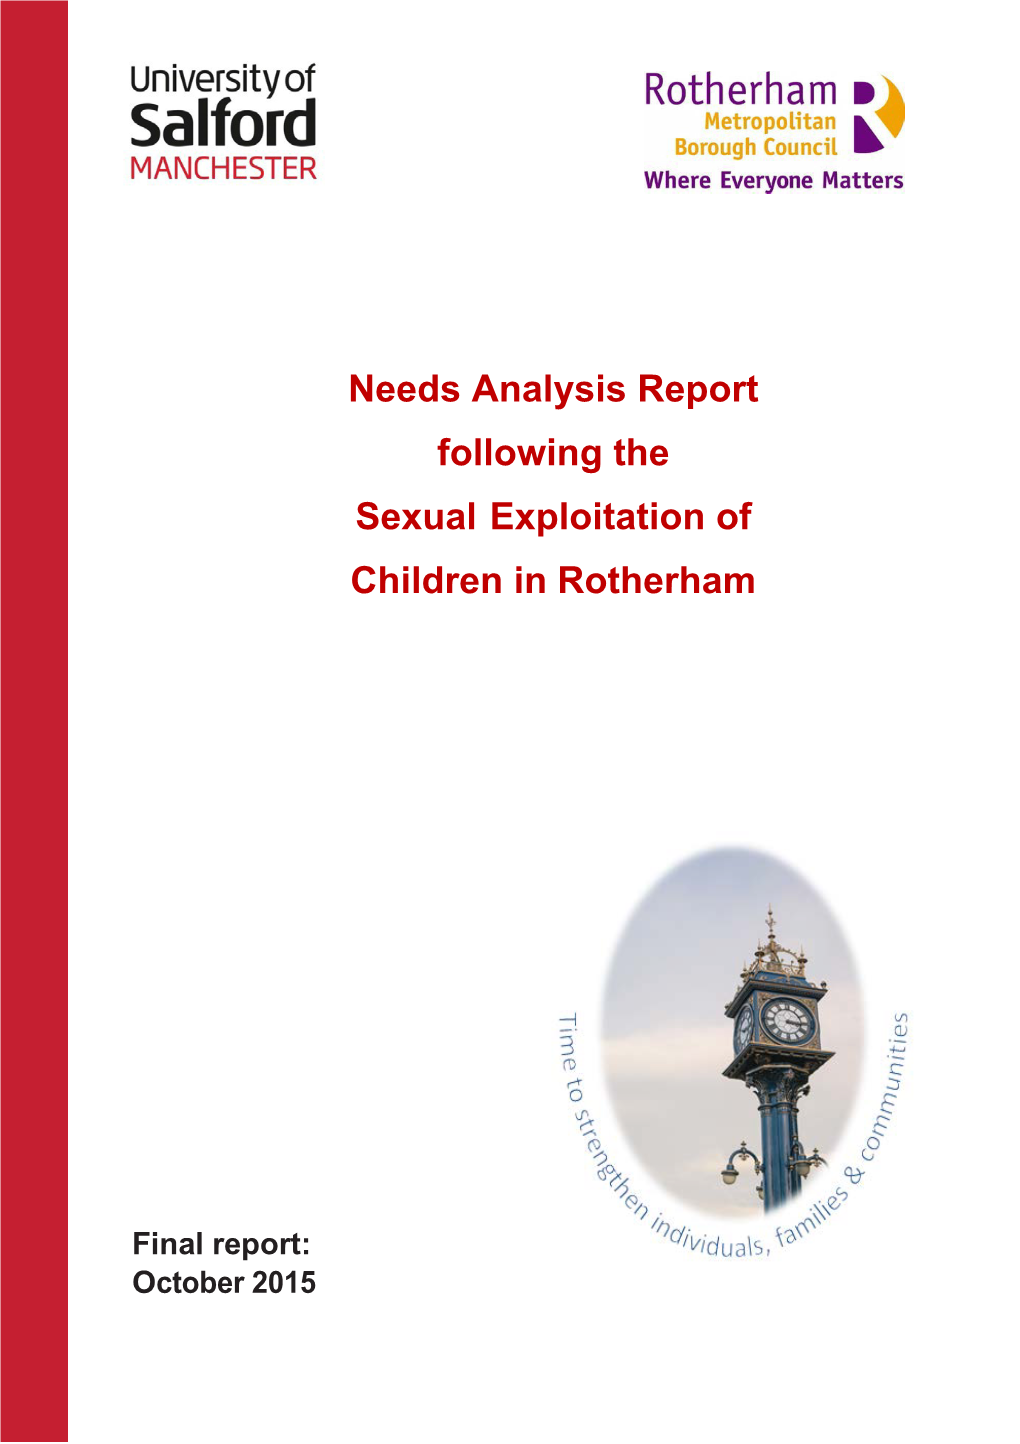 Needs Analysis Report Following the Sexual Exploitation of Children in Rotherham